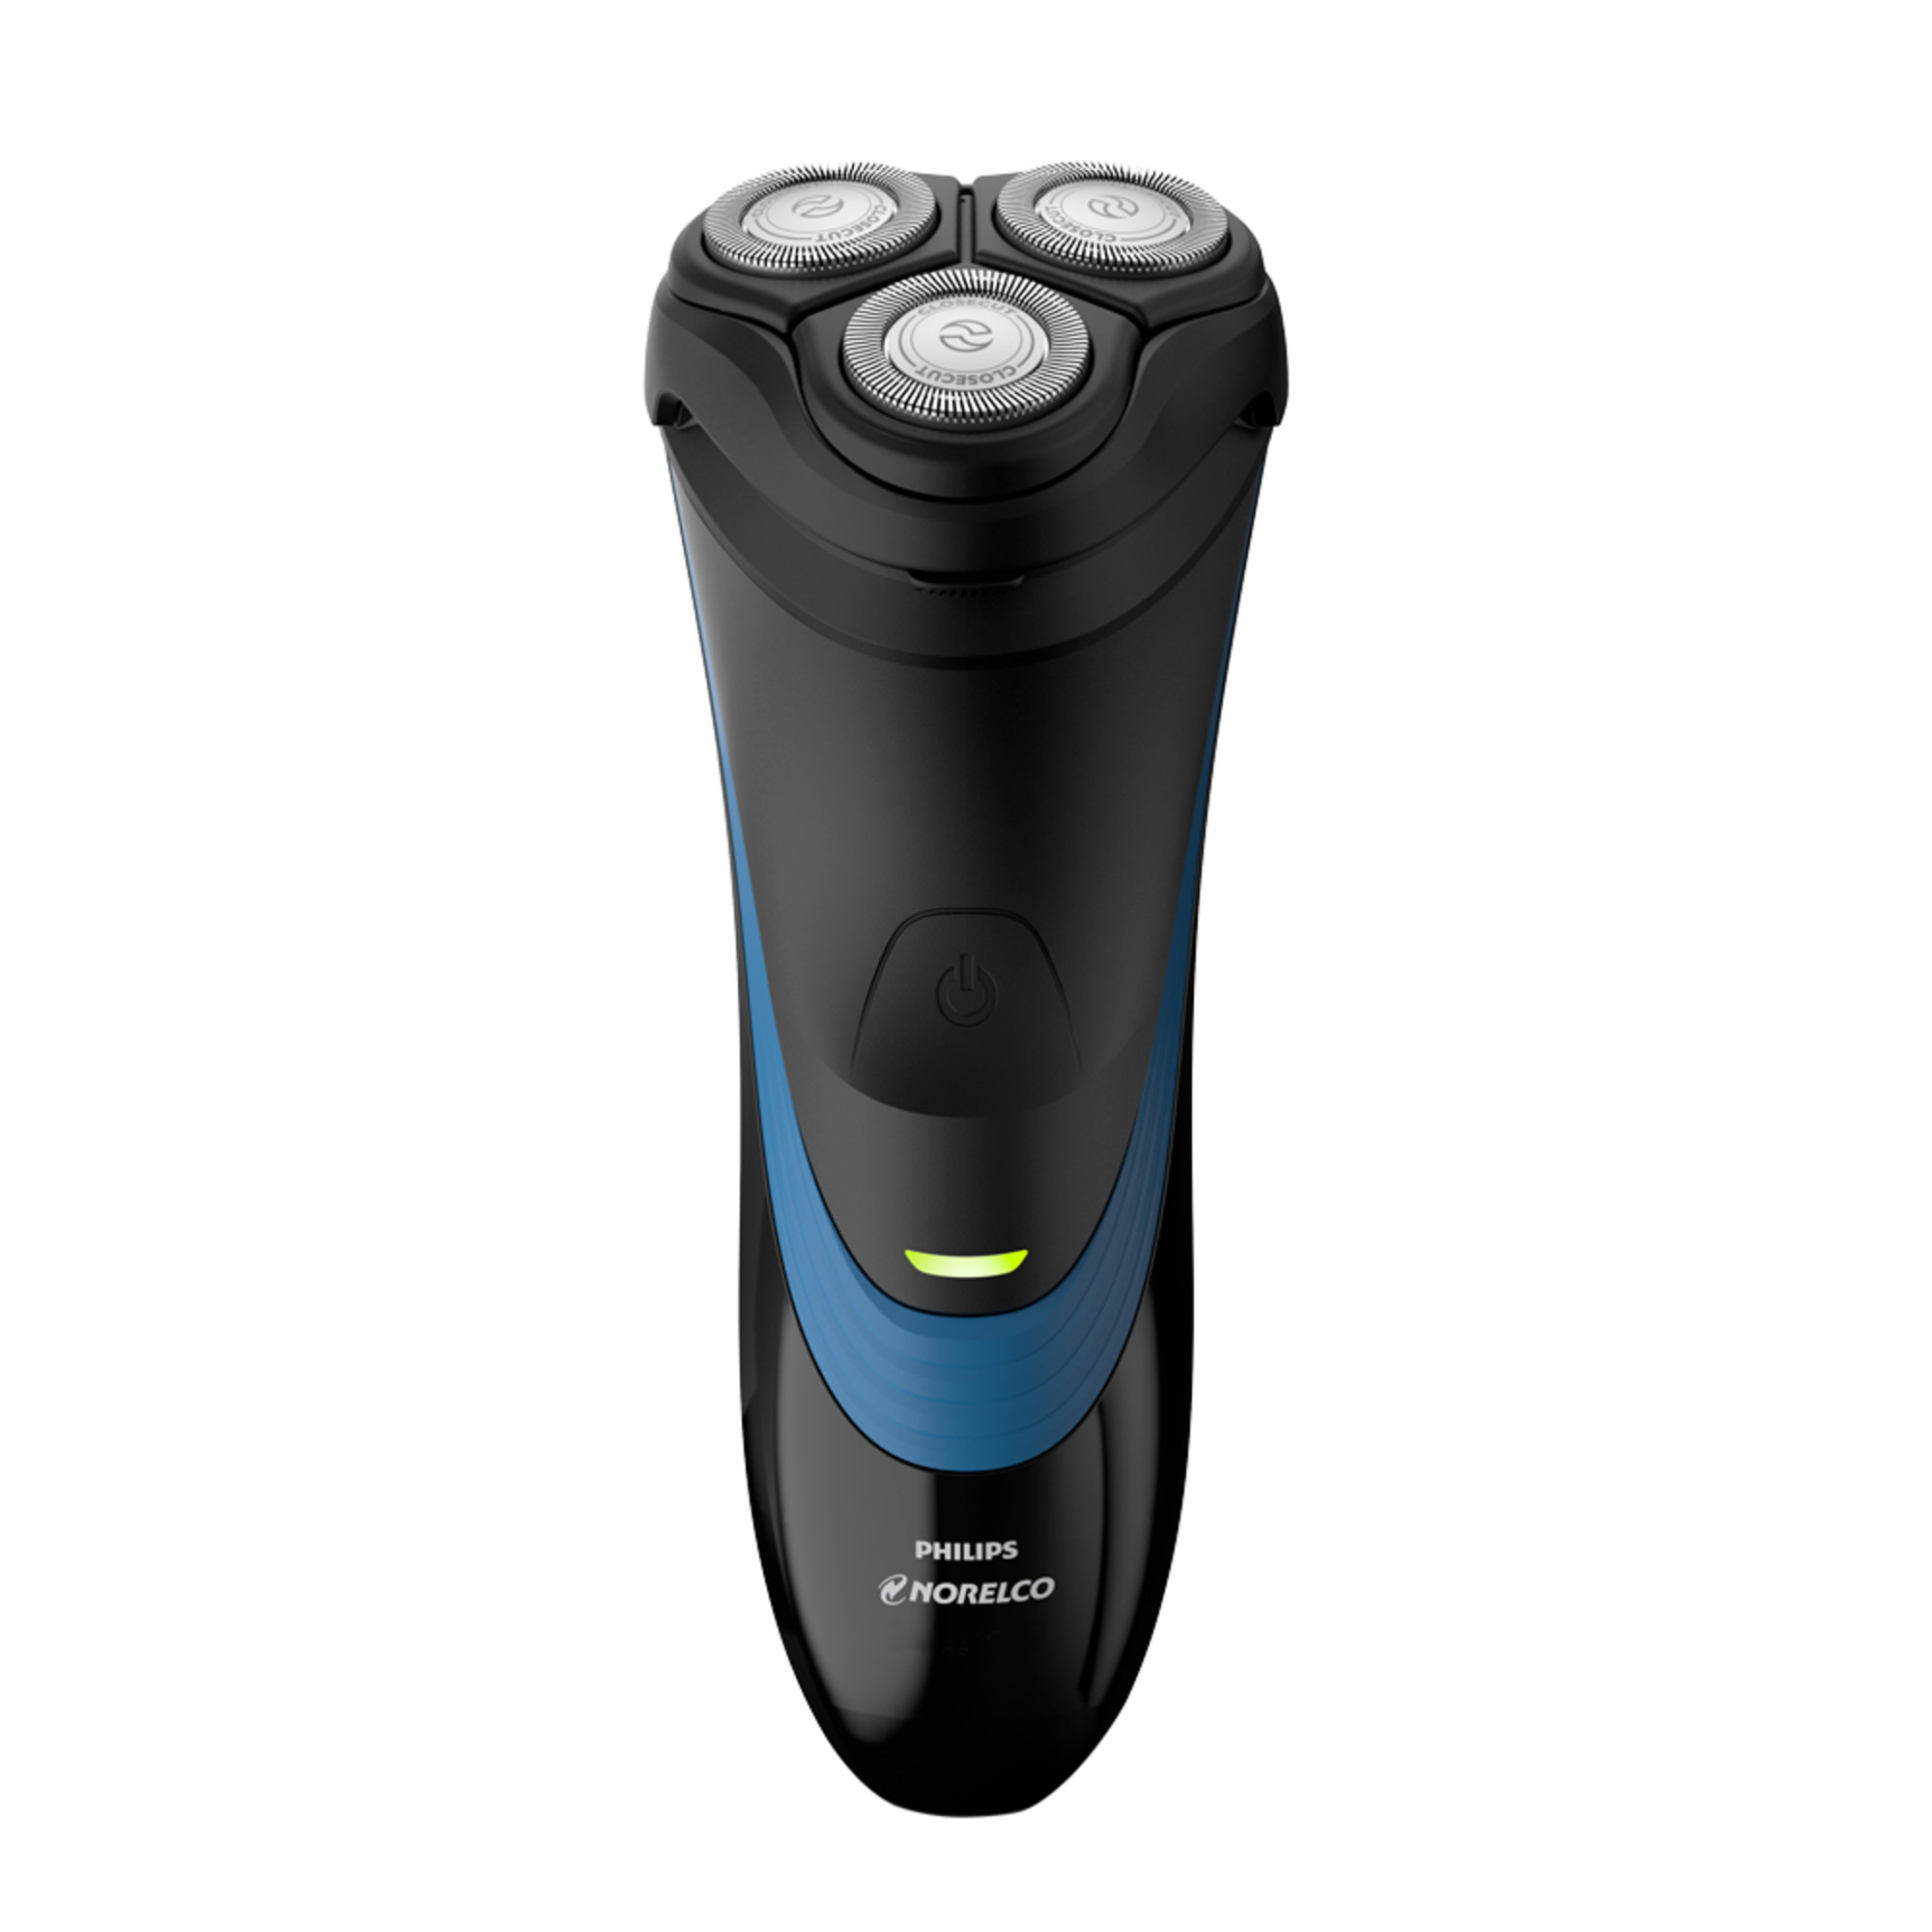 Philips Norelco Series 2000 Electric Shaver 2100, S1560/81 - image 1 of 4